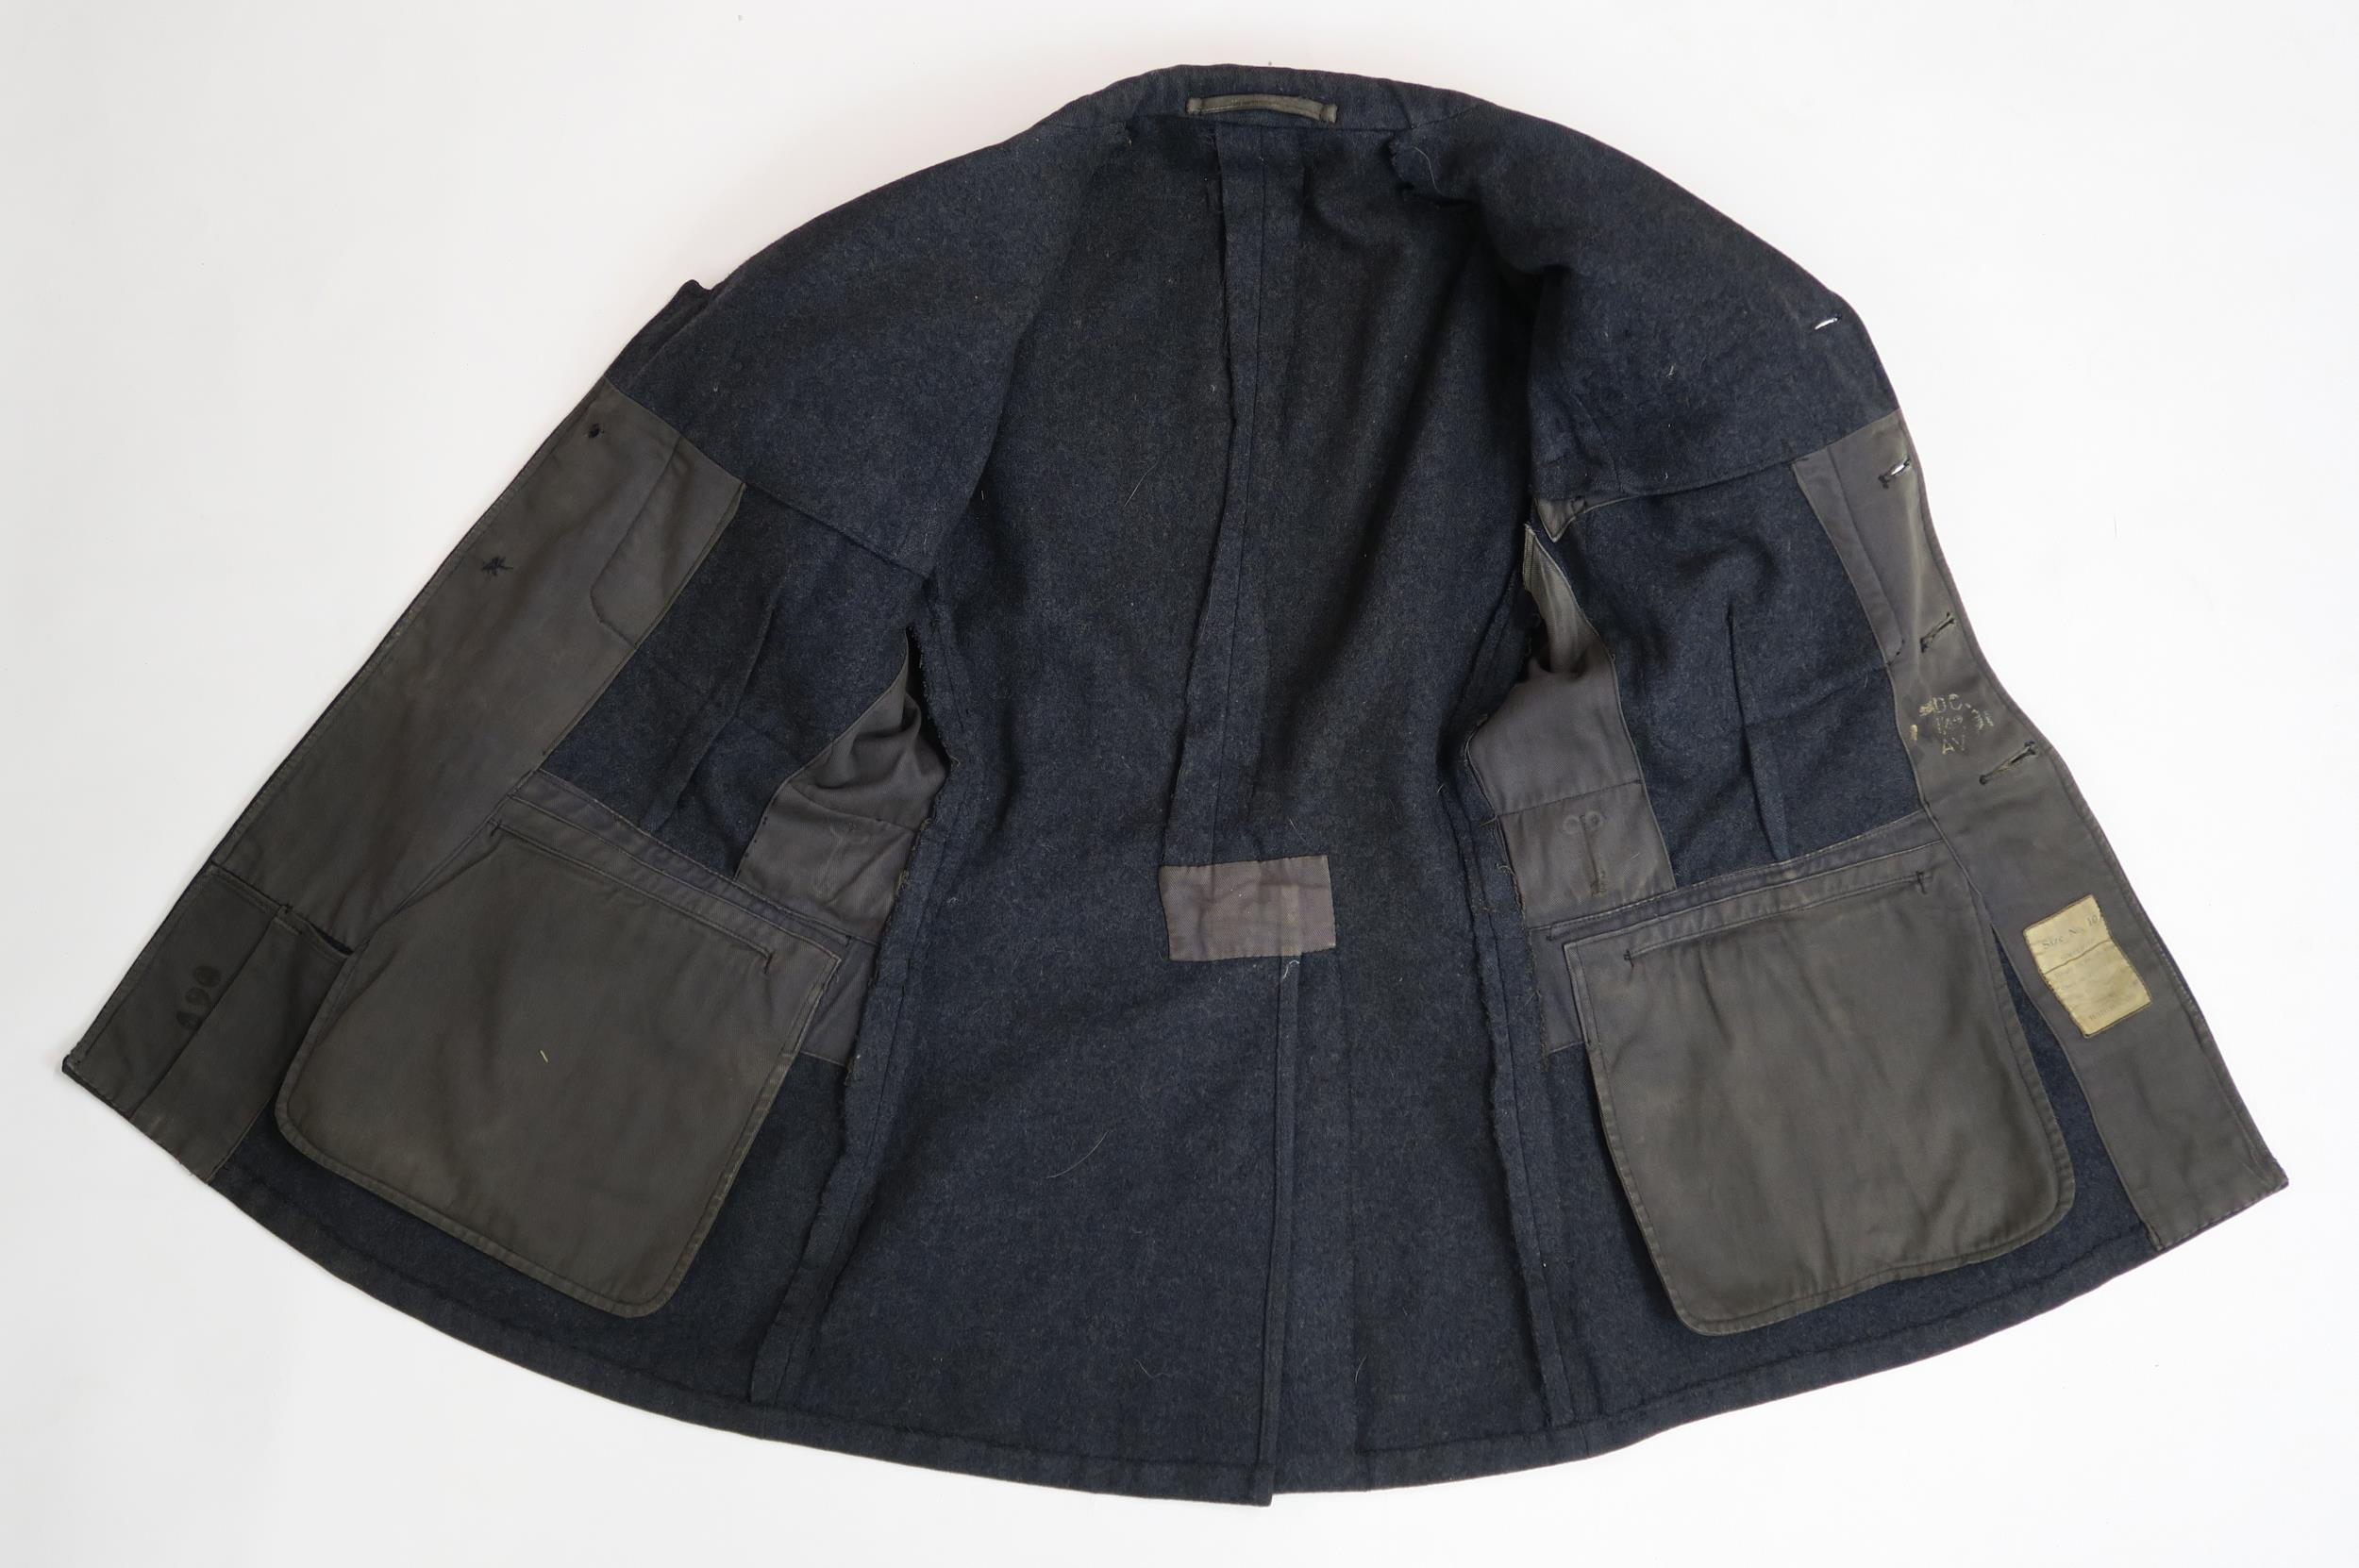 A WW2 1942-DATED POLISH RAF SERGEANT'S TUNIC Size no. 10, with embroidered "Poland" shoulder titles, - Image 6 of 9